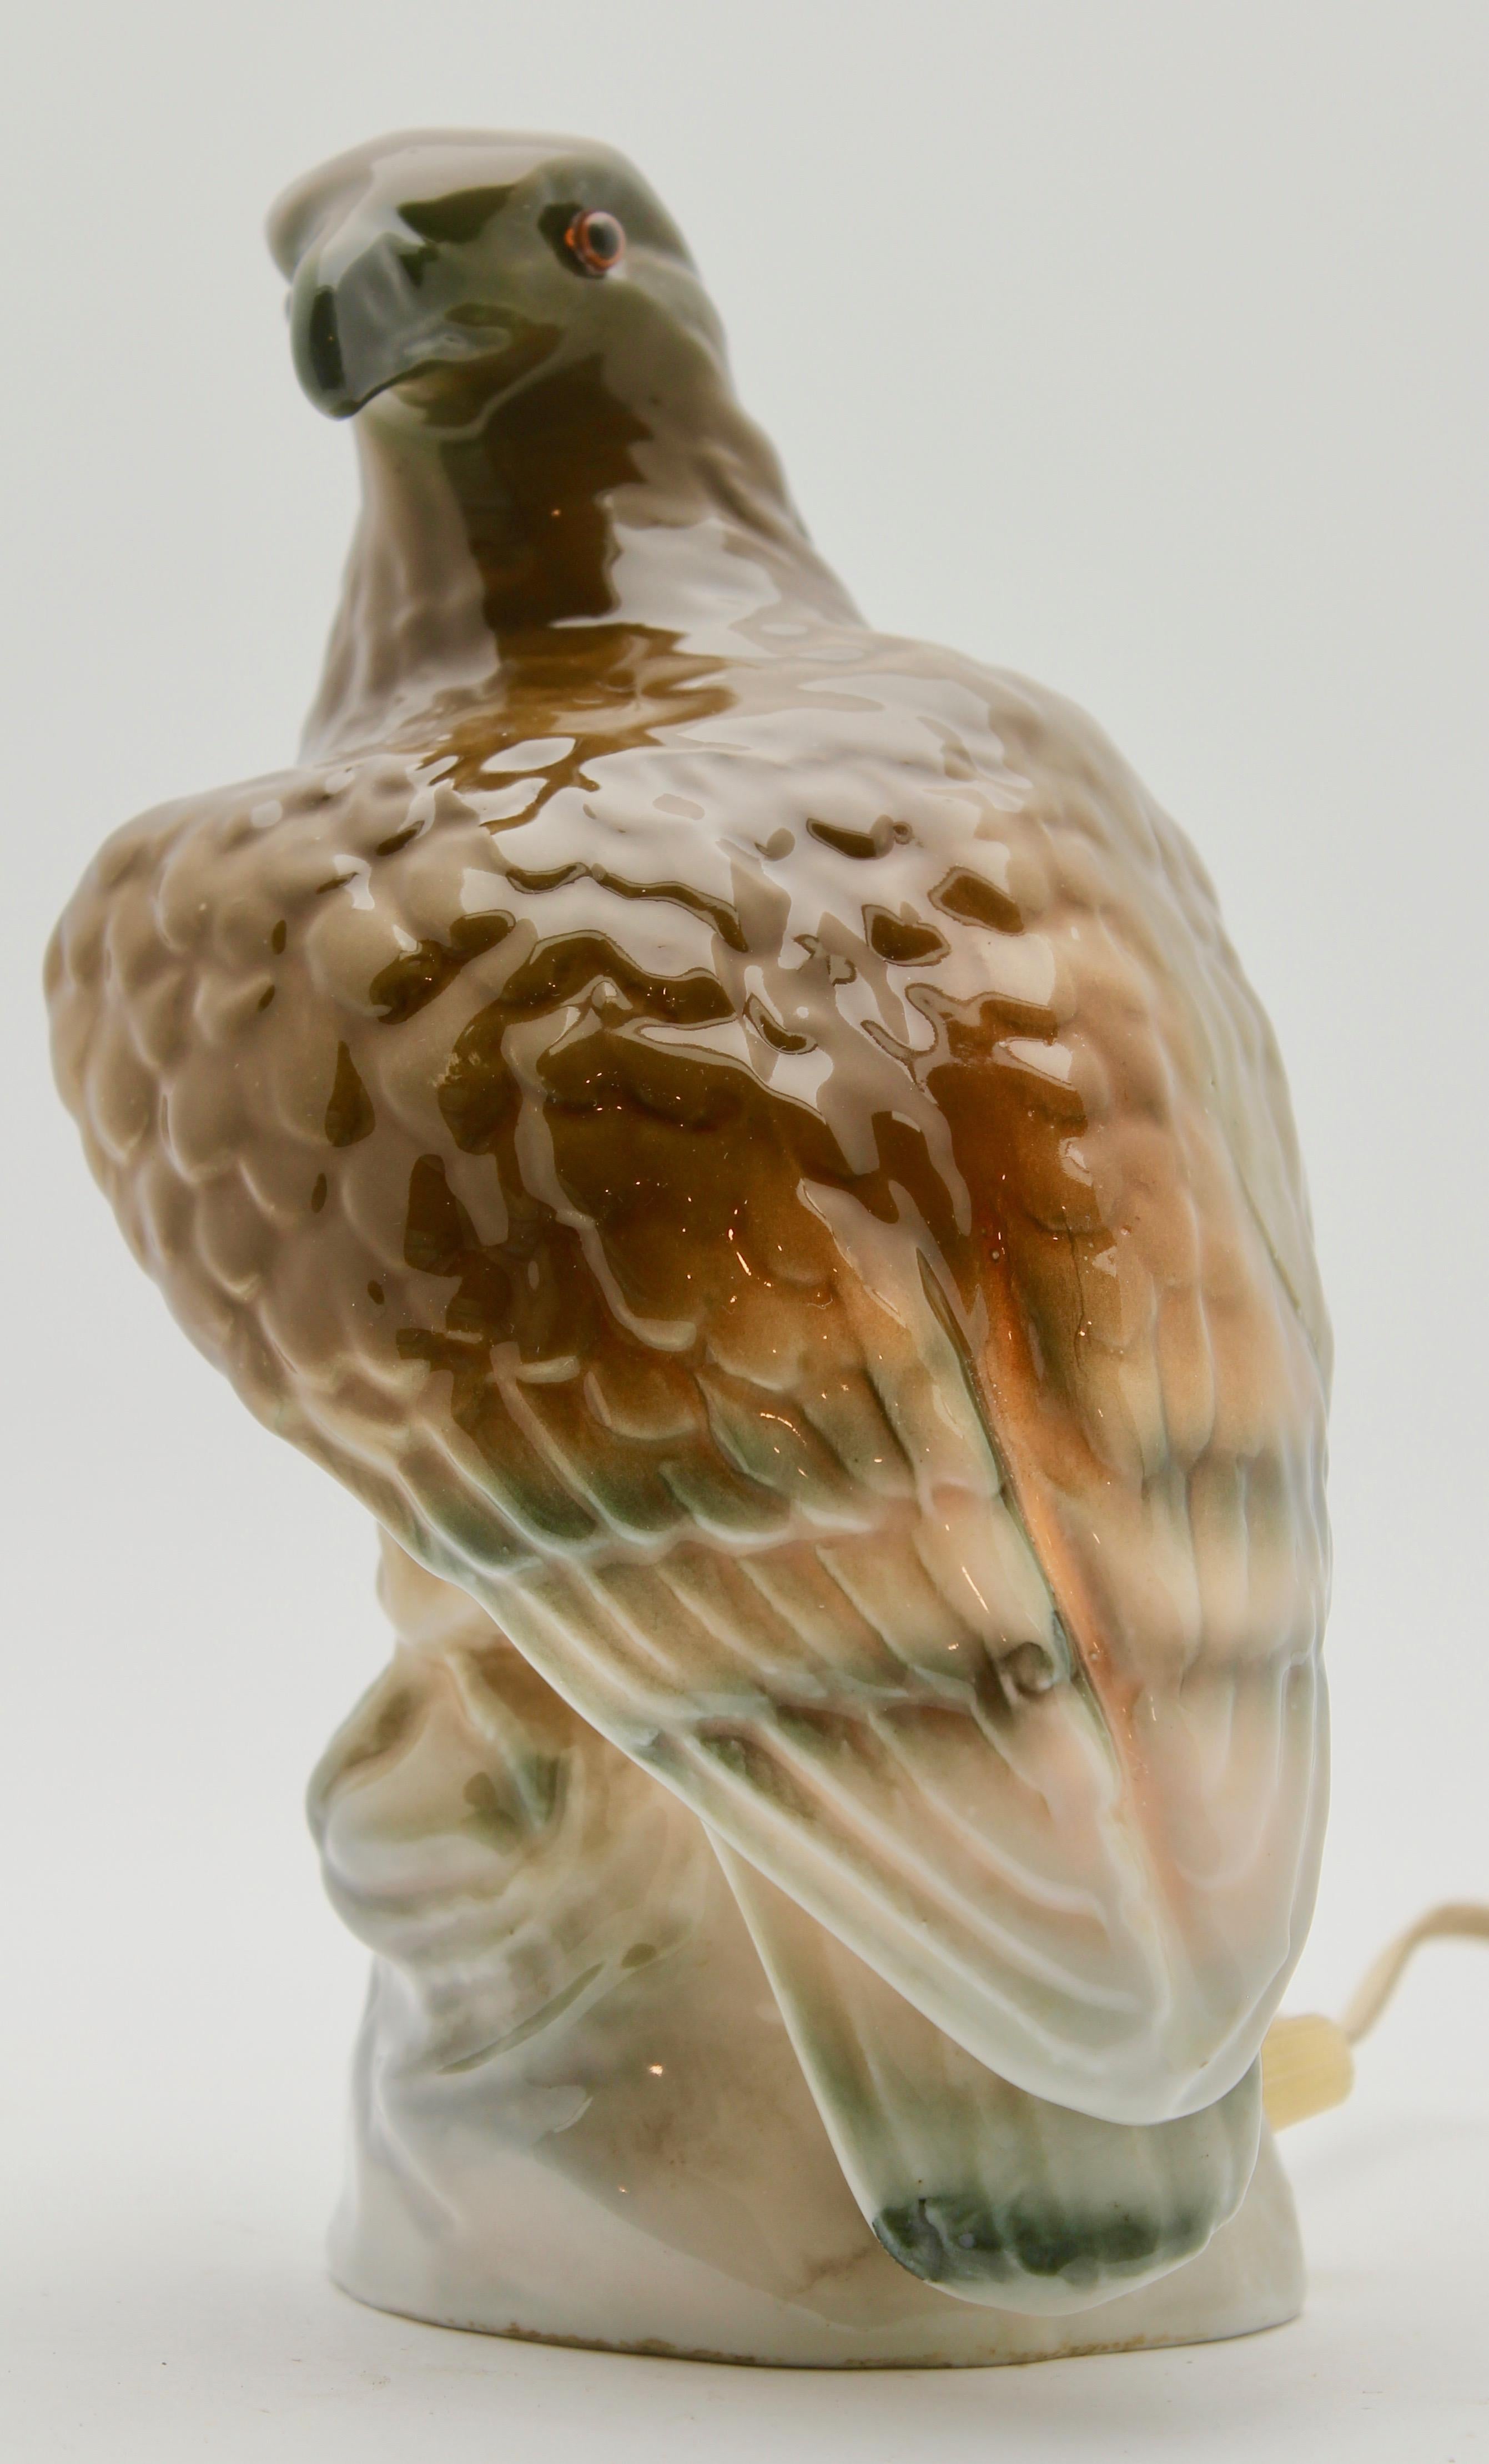 Rare and gorgeous eagle perfume lamp attributed to Carl Scheidig Grafenthal, Germany.
Excellent condition, lamp is in working order.
Size: Height 21 cm, 8.26 inches, width 11 cm, 4.33 inches.
Germany, 1930s, excellent condition
Porcelain